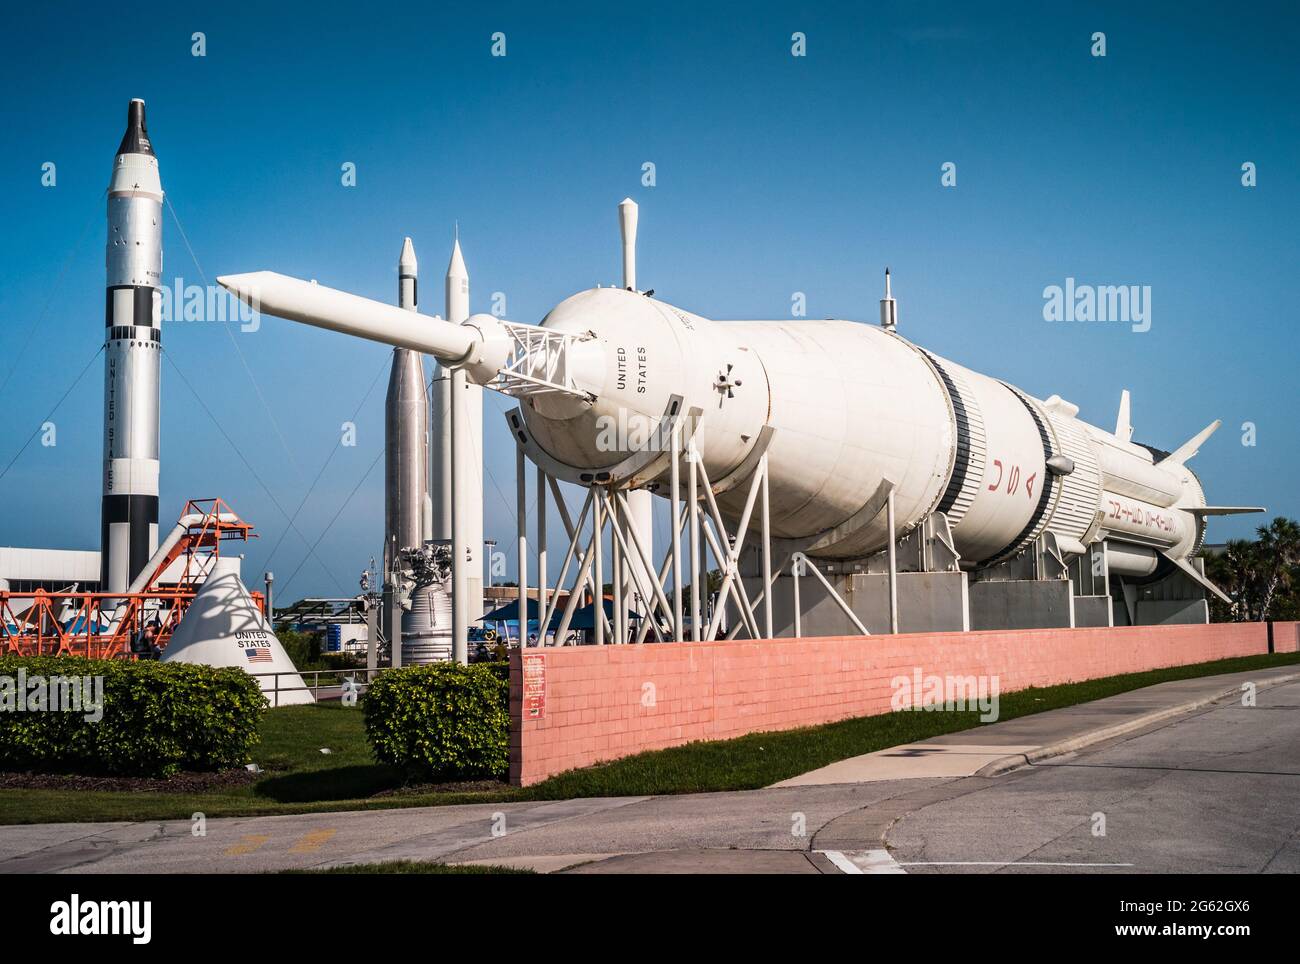 Cape Canaveral, Florida, United States - July 21 2012: NASA Saturn 1B Rocket in the Rocket Garden at Kennedy Space Center Stock Photo